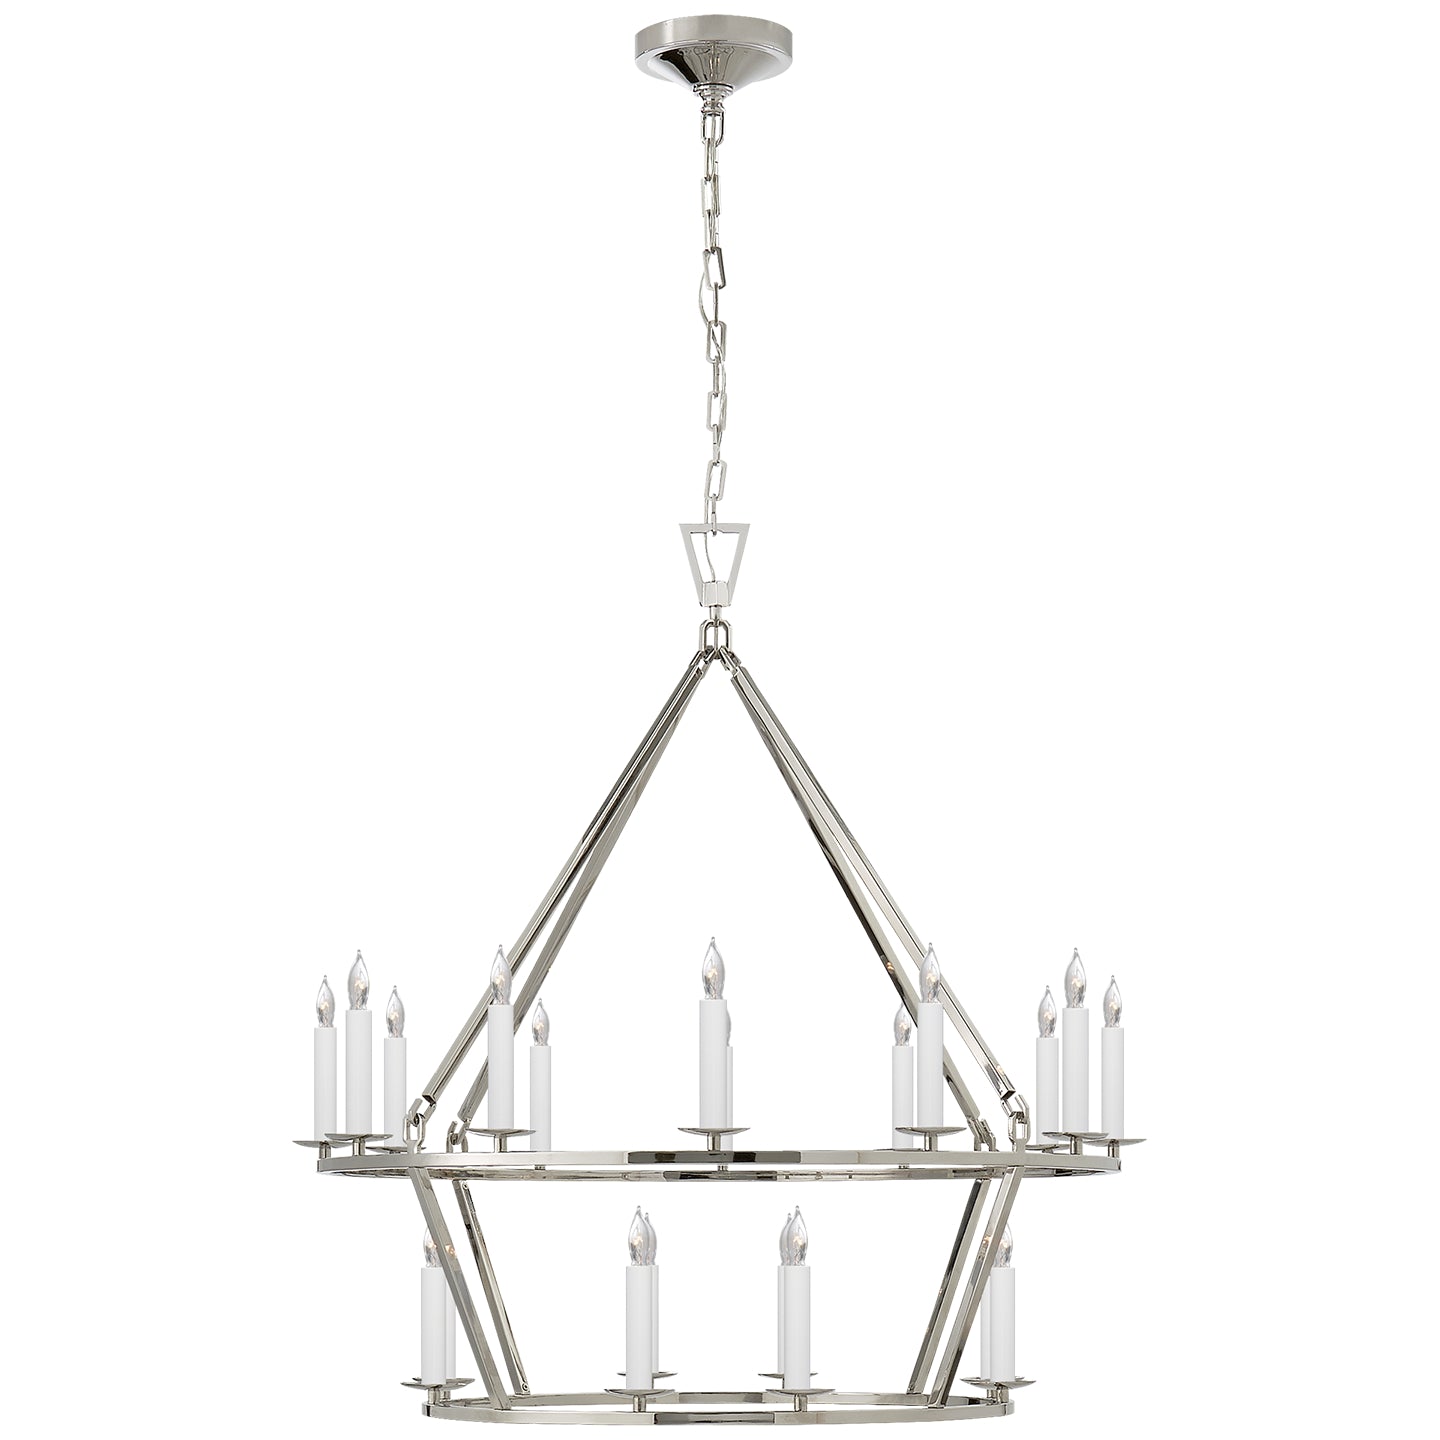 Load image into Gallery viewer, Visual Comfort Signature - CHC 5178PN - 20 Light Chandelier - Darlana Ring - Polished Nickel
